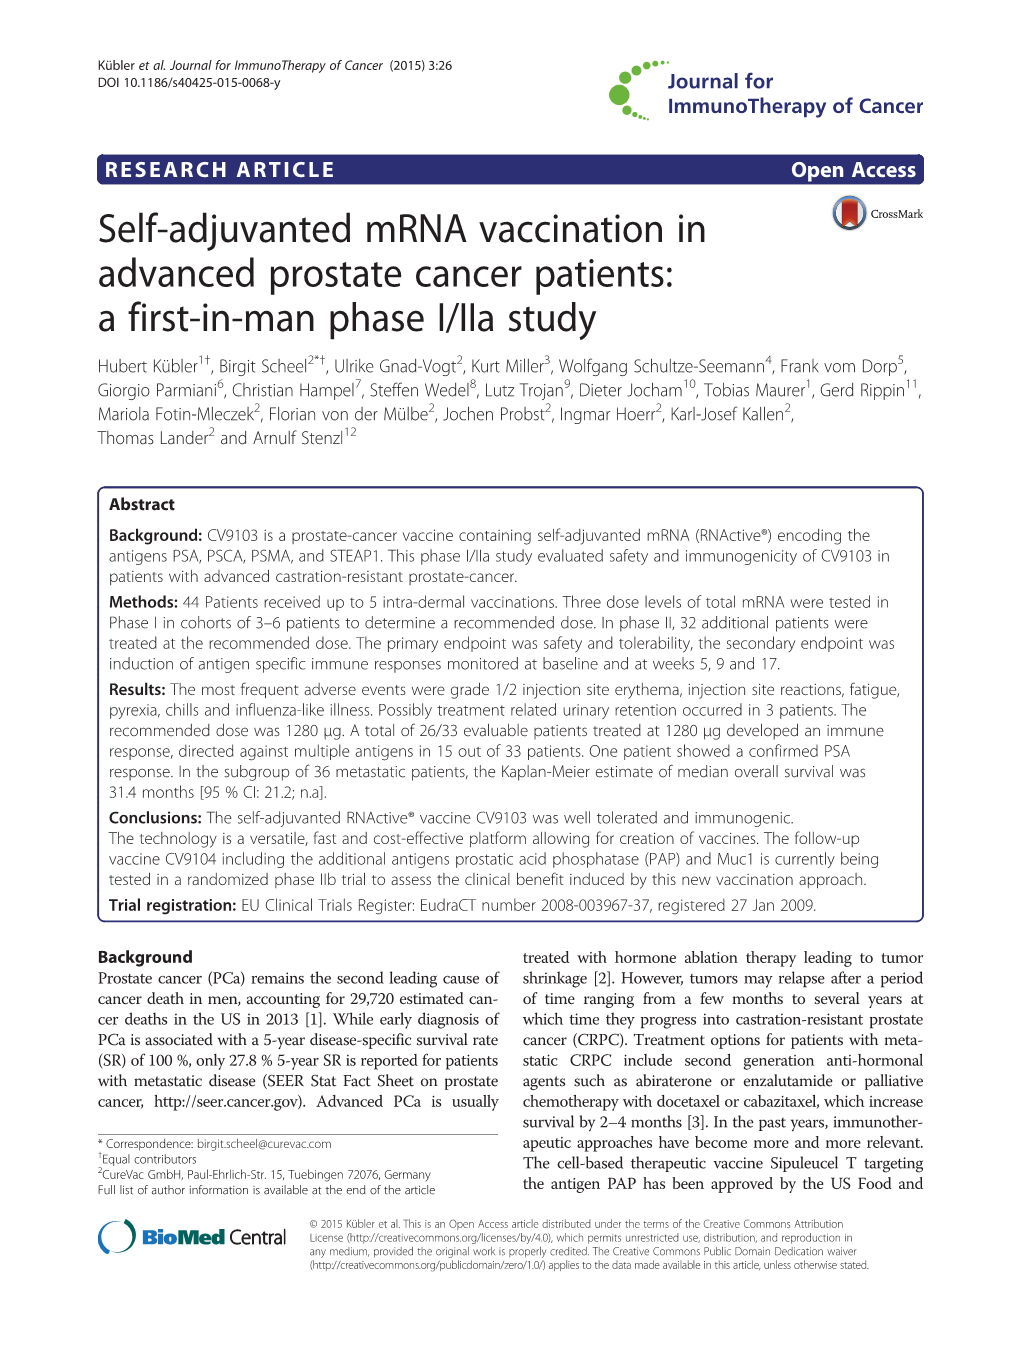 Self-Adjuvanted Mrna Vaccination in Advanced Prostate Cancer Patients